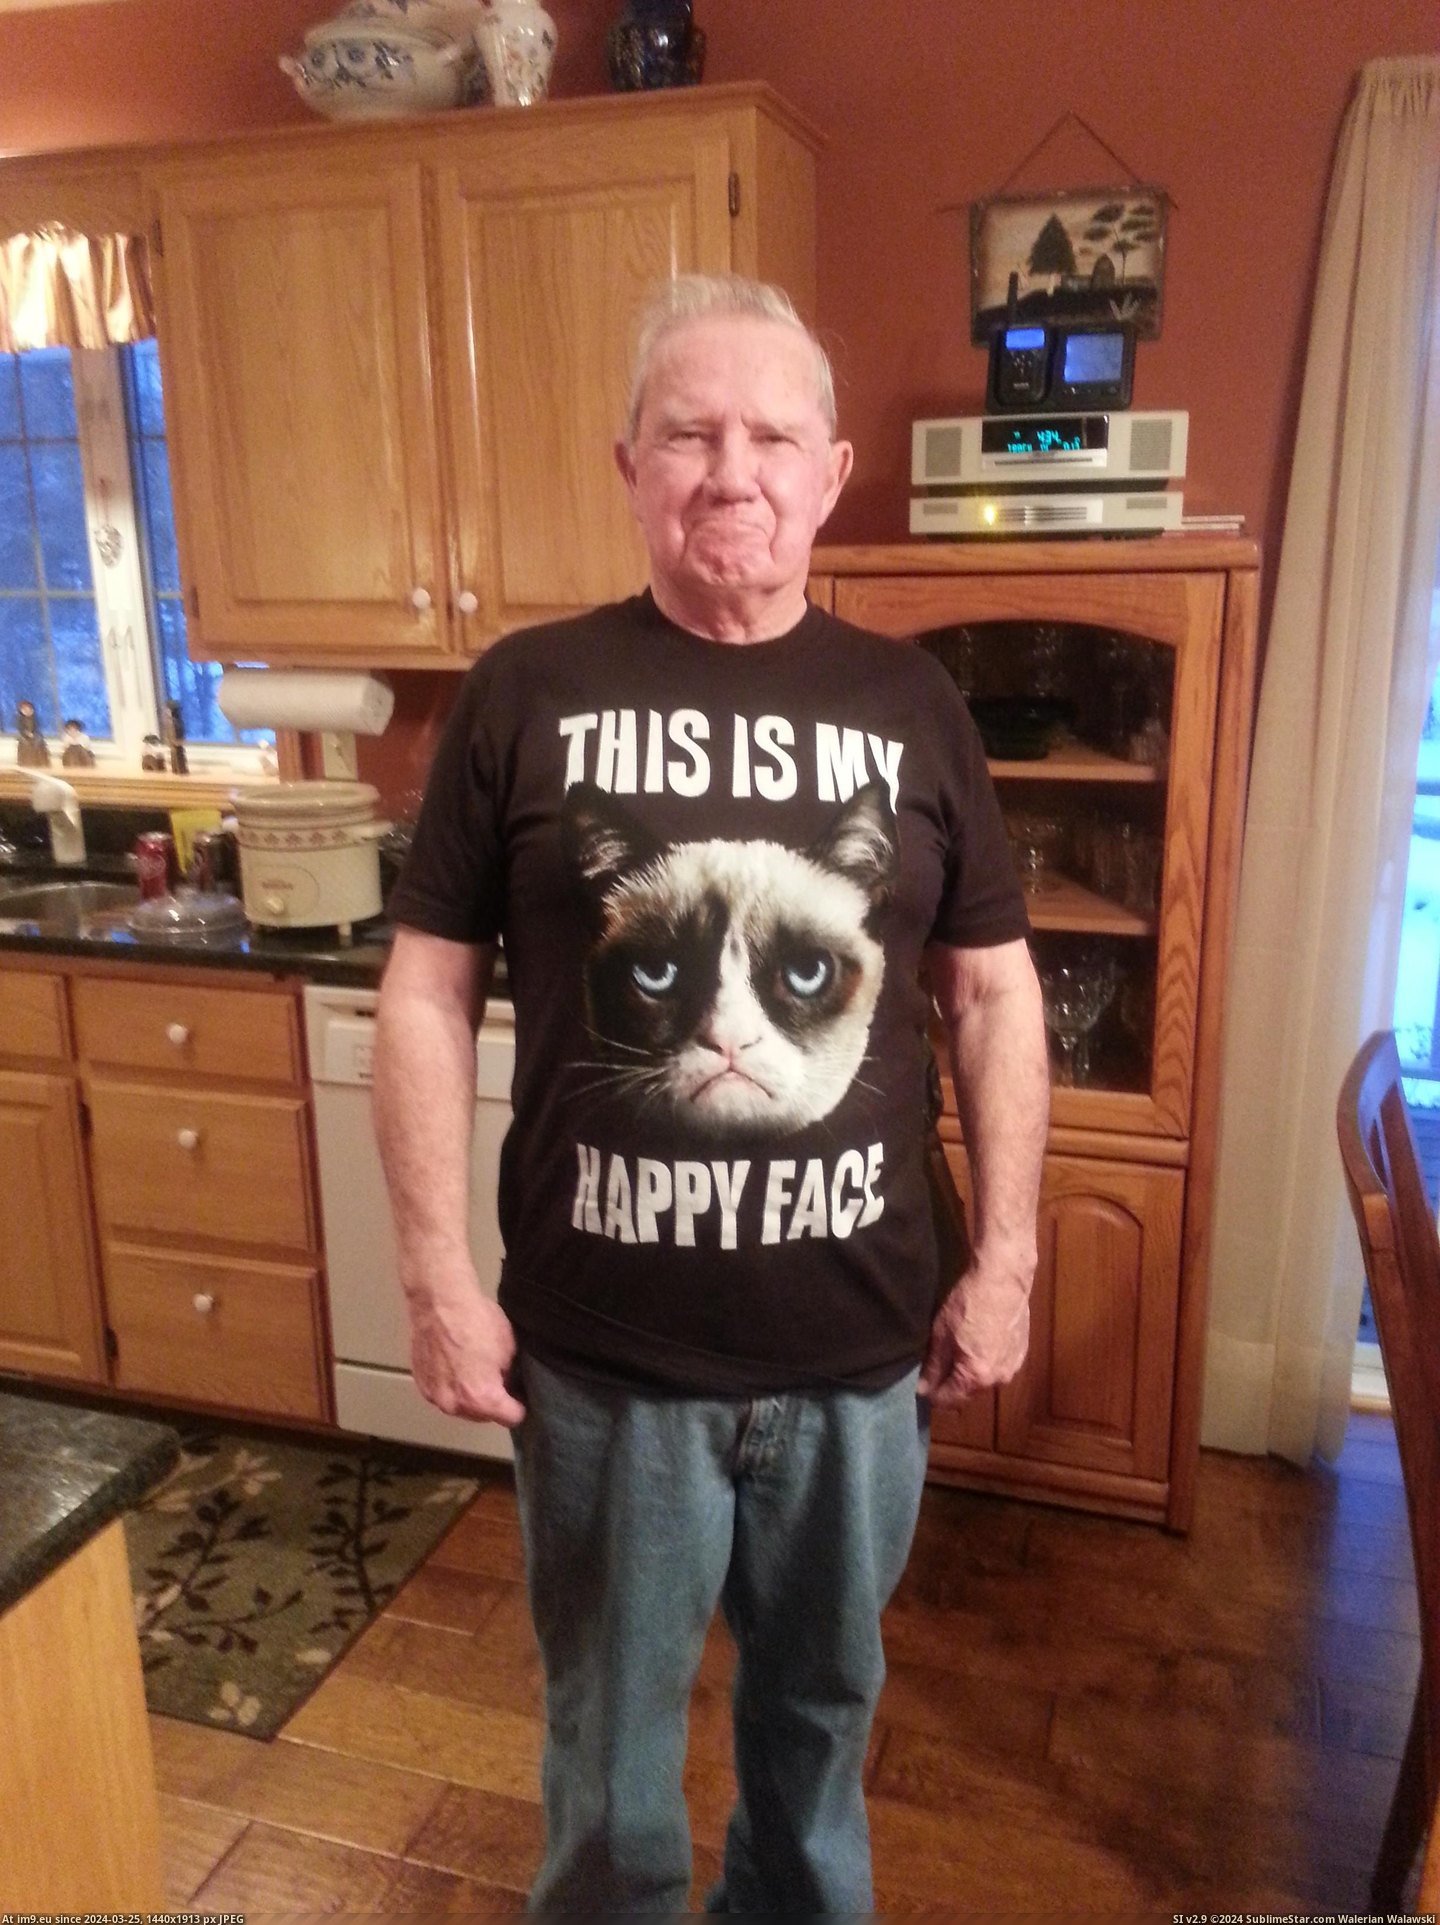 #Funny #For #Christmas #Wanted #Grandpa #Was #All [Funny] This was all my grandpa wanted for Christmas Pic. (Изображение из альбом My r/FUNNY favs))